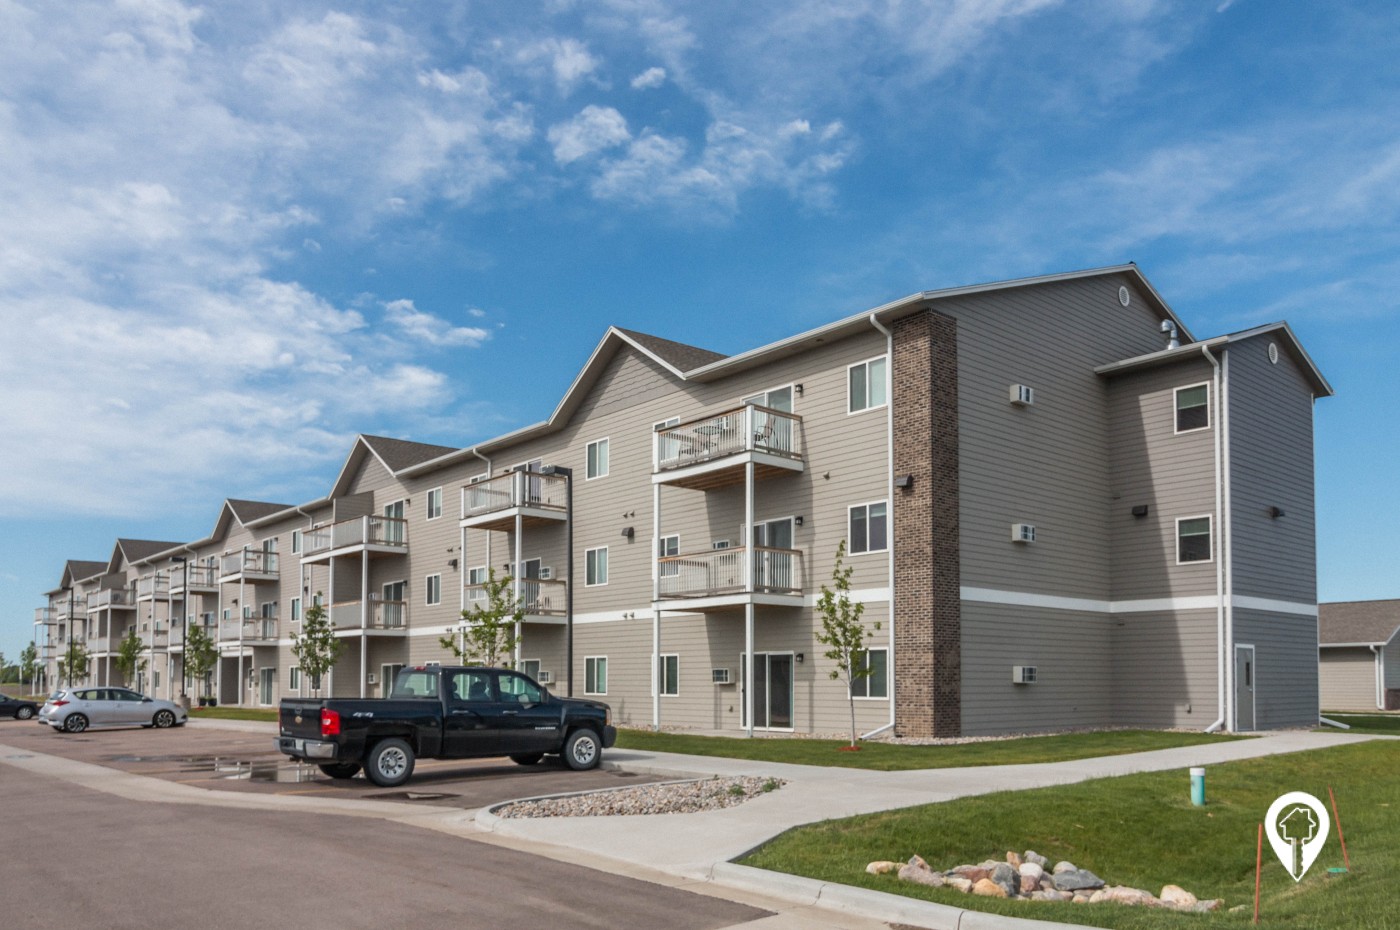 Regency Commercial Real Estate - River Valley Apartments